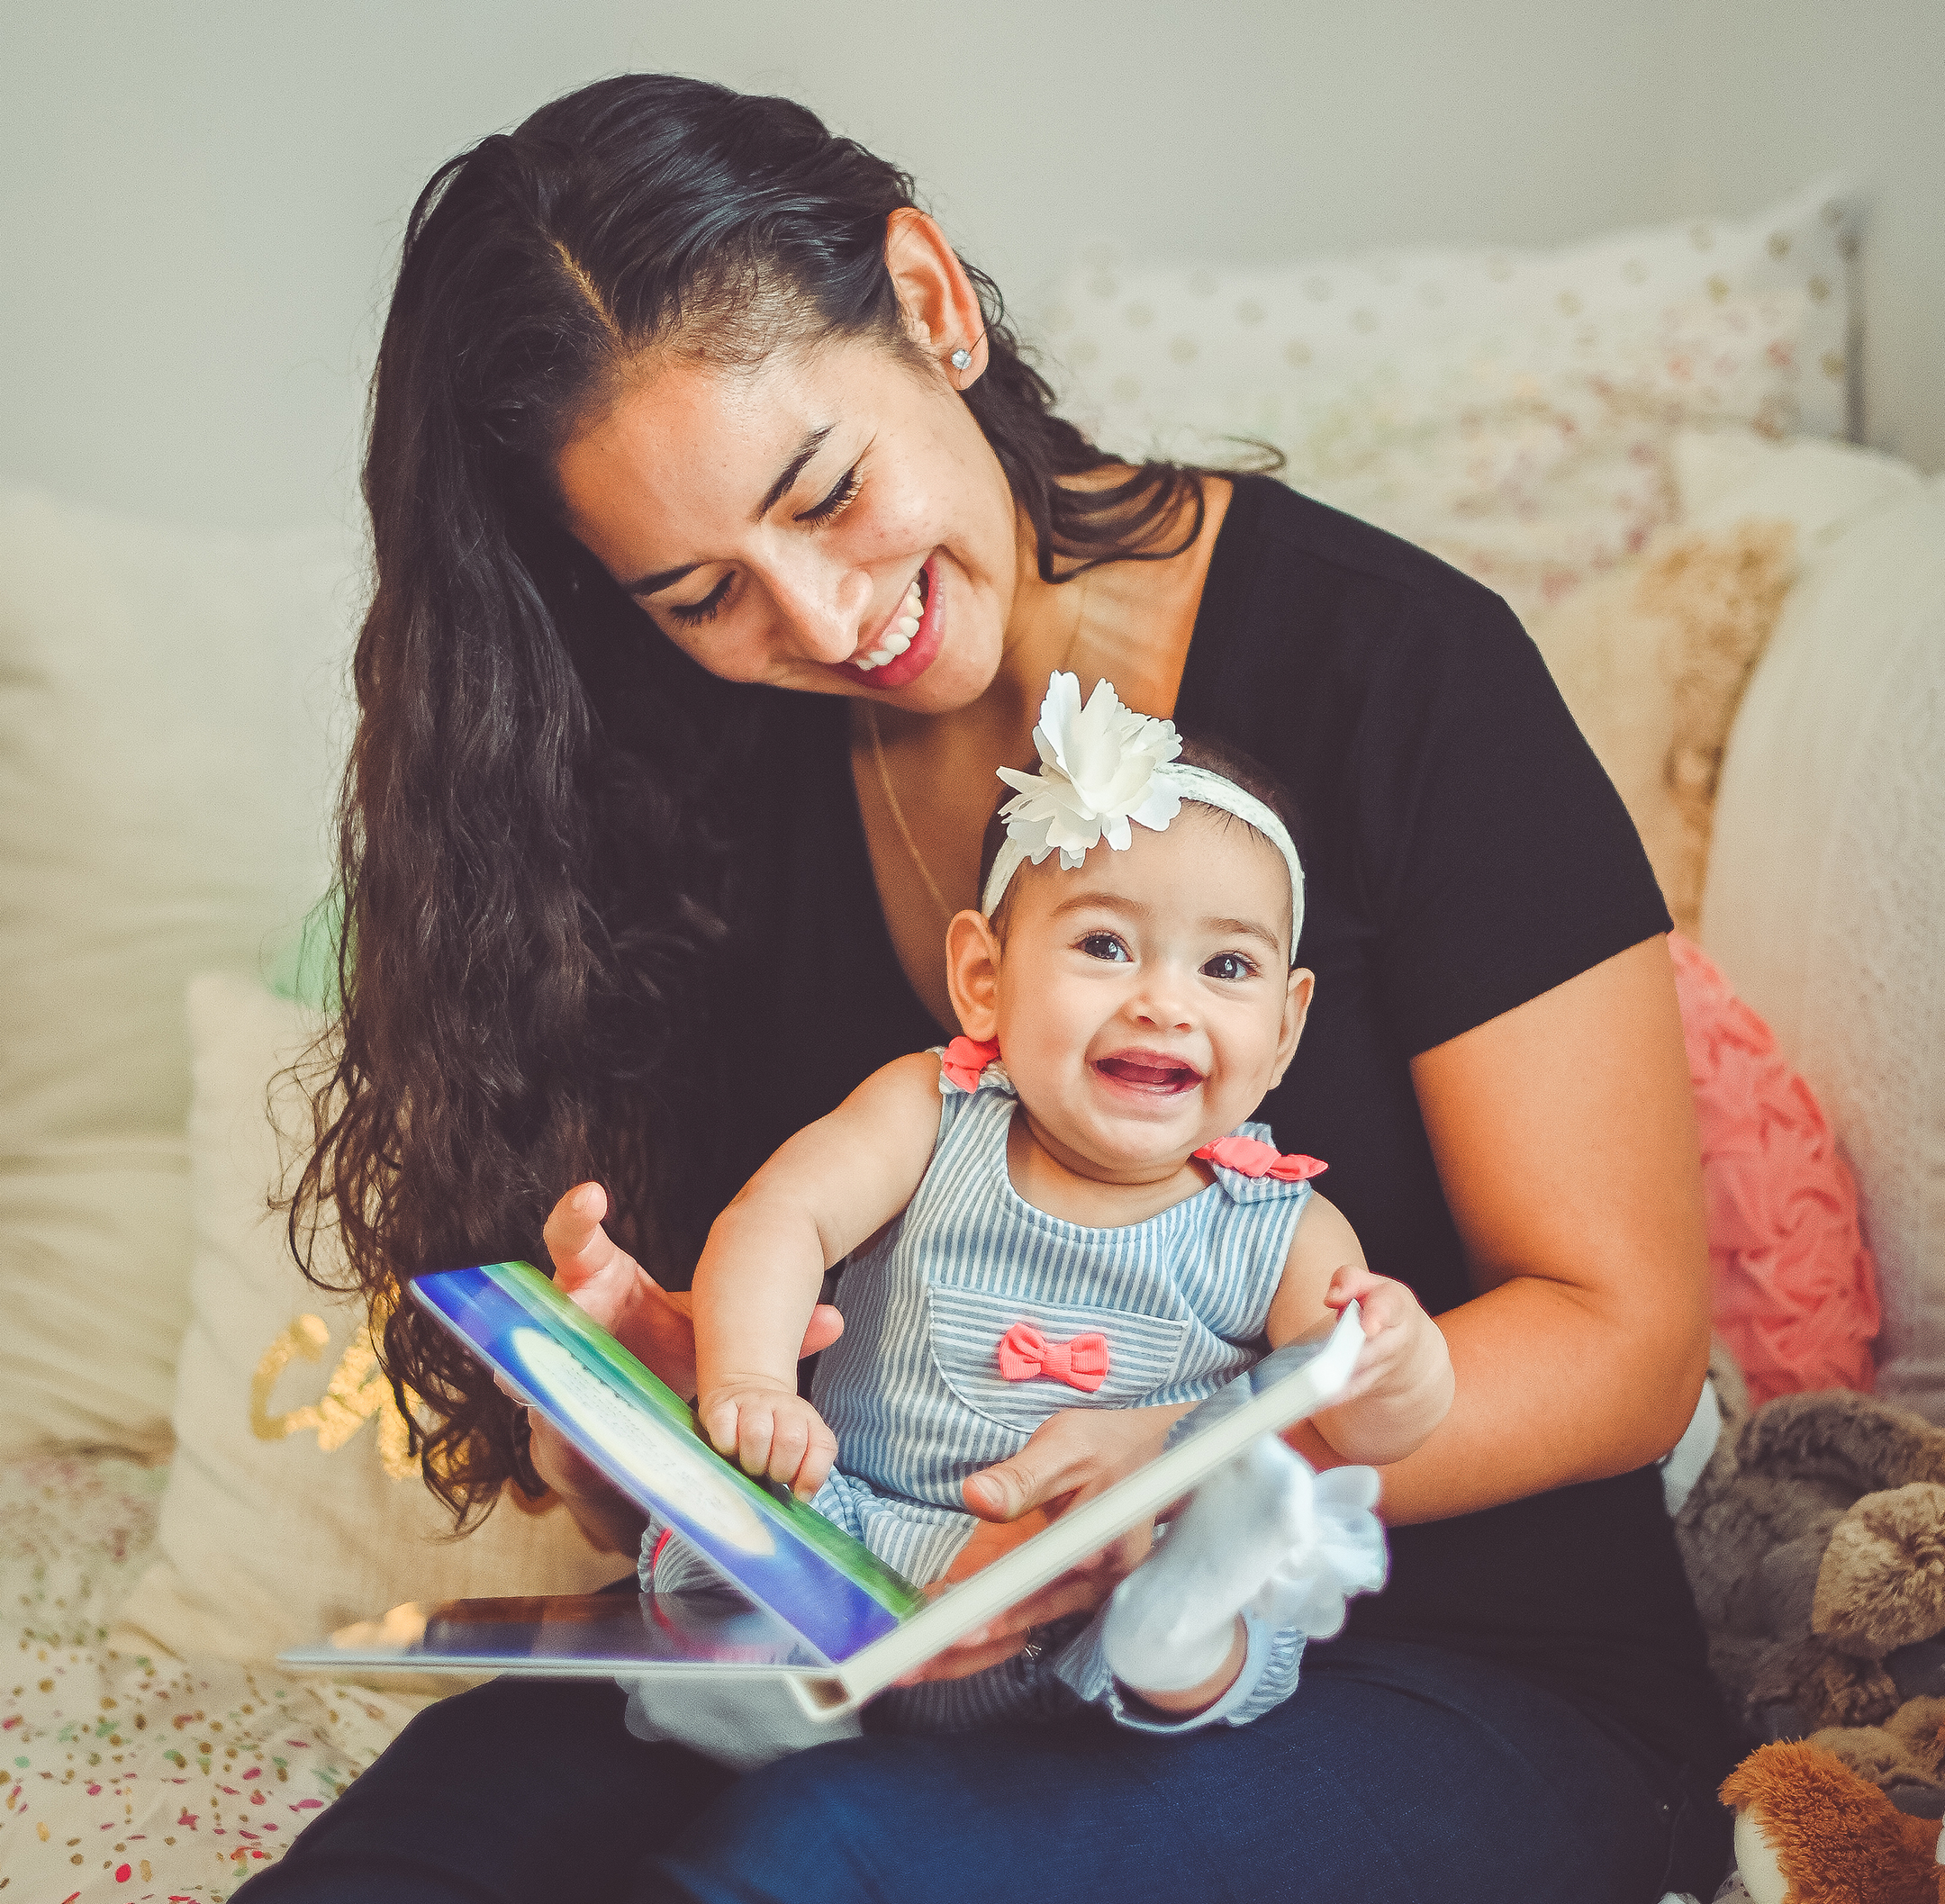 mother and daughter Latina pair read a book together at home in a candid moment. Little girl is around 6 months old and her mother sits on a bed reading with her